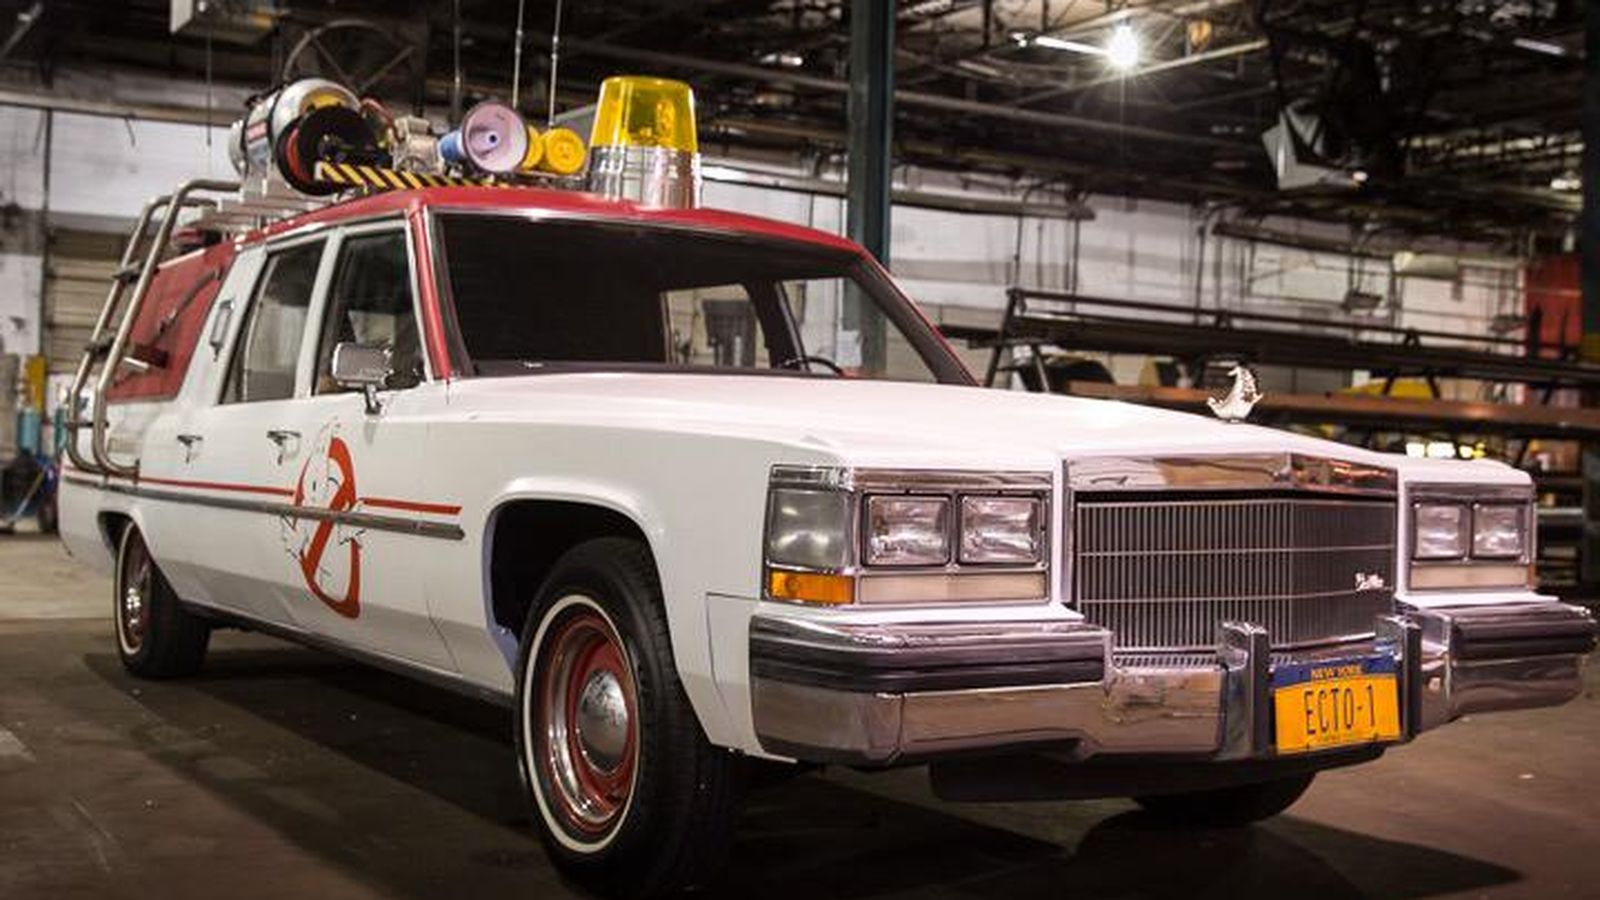 Ecto 1, from Ghostbusters 3